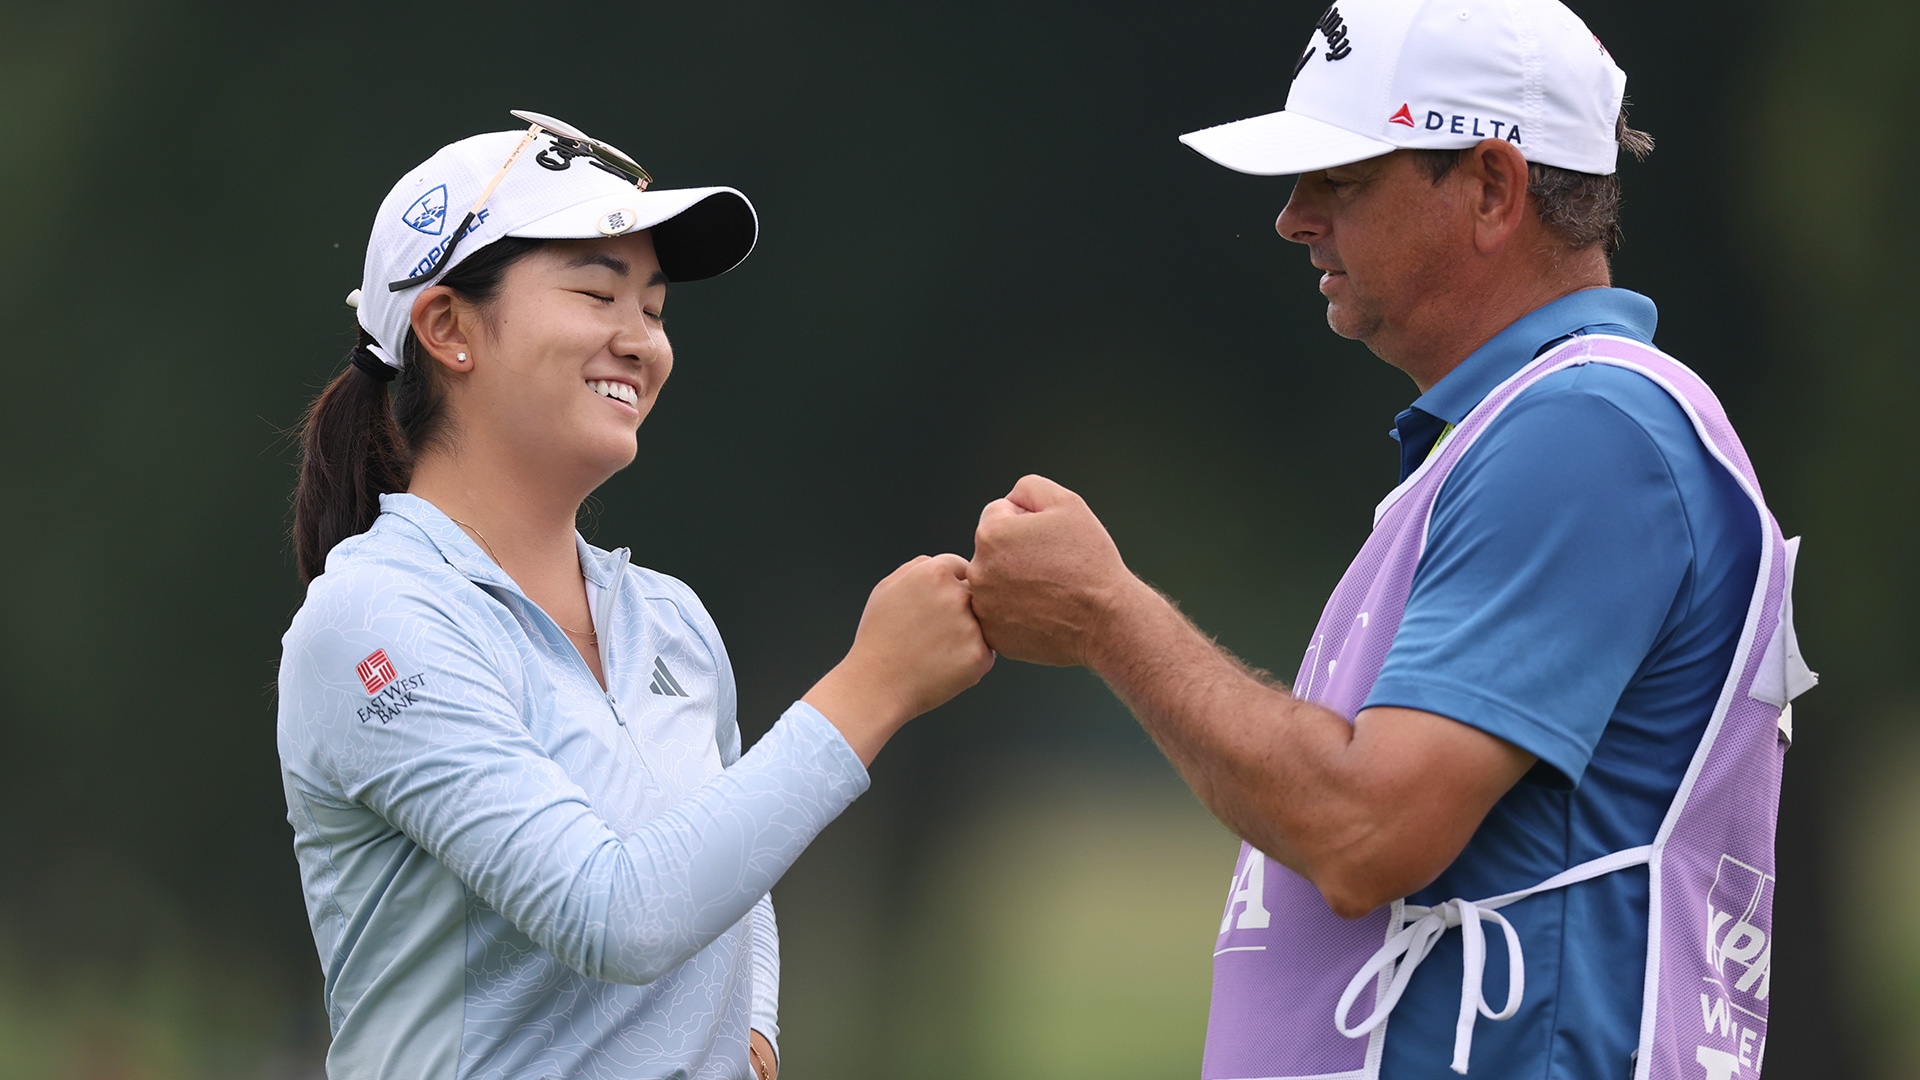 No win, but a valuable learning experience for Rose Zhang in first major as a pro